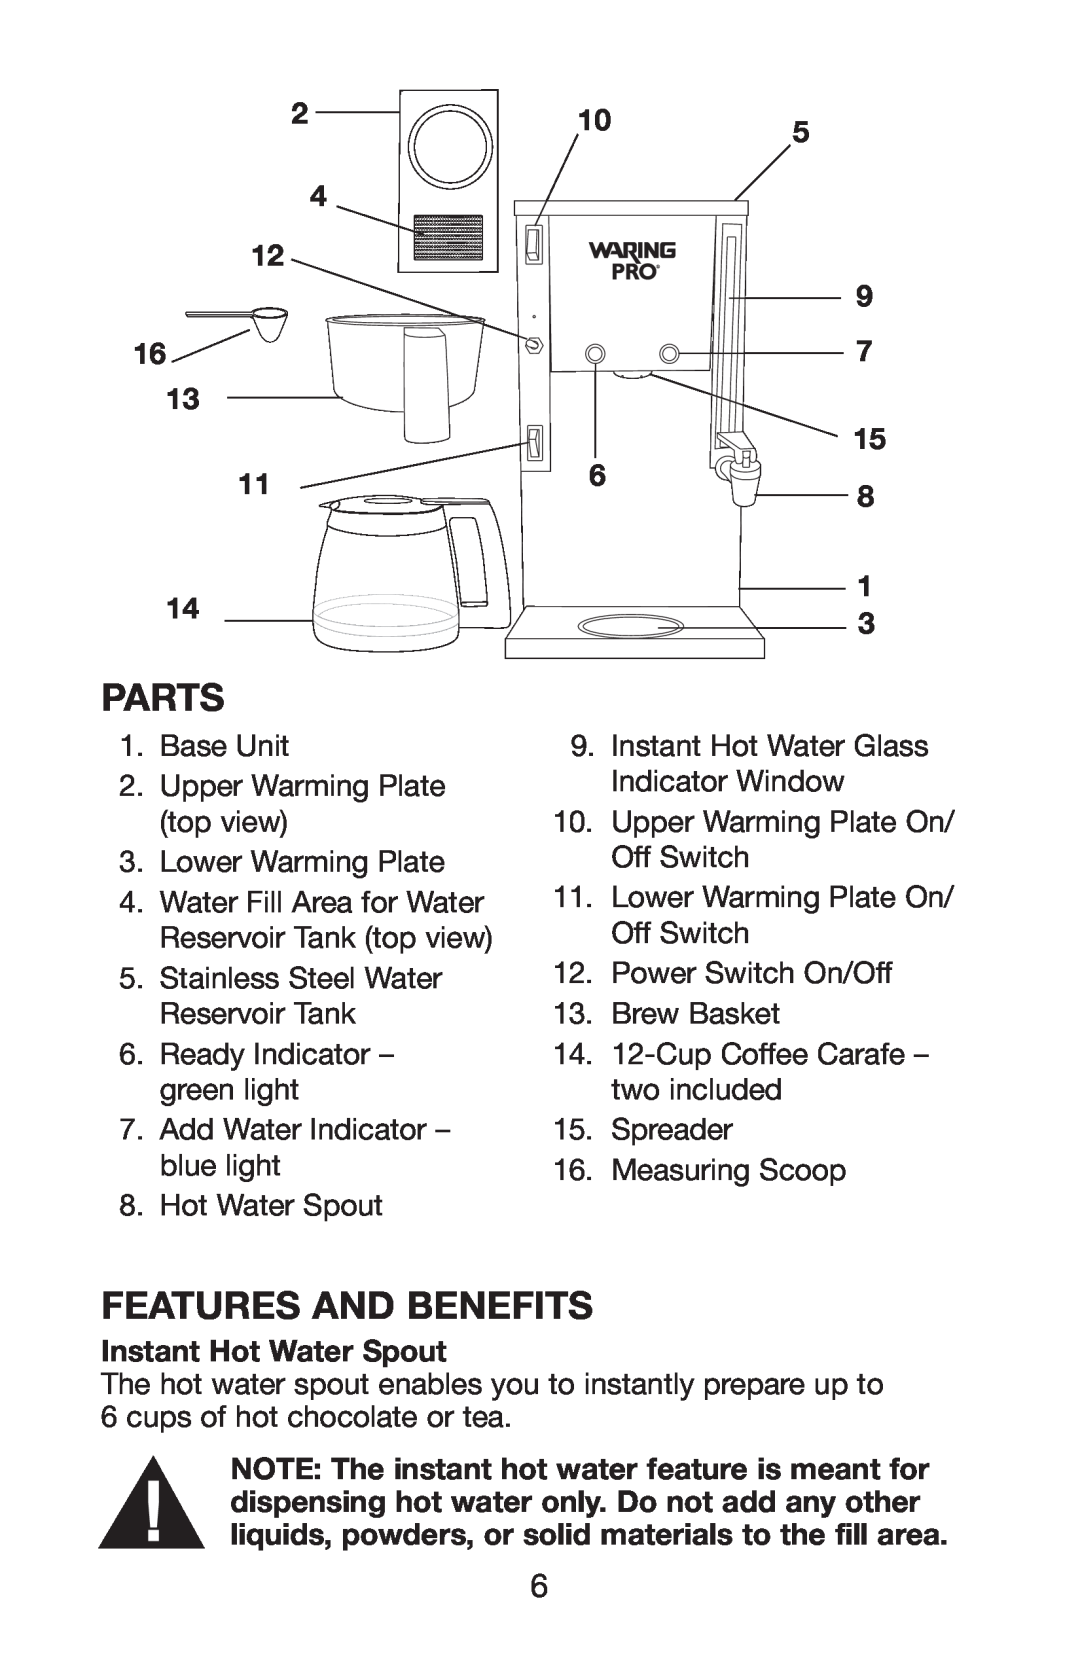 Waring WC1000 manual Parts, Features And Benefits, Instant Hot Water Spout 